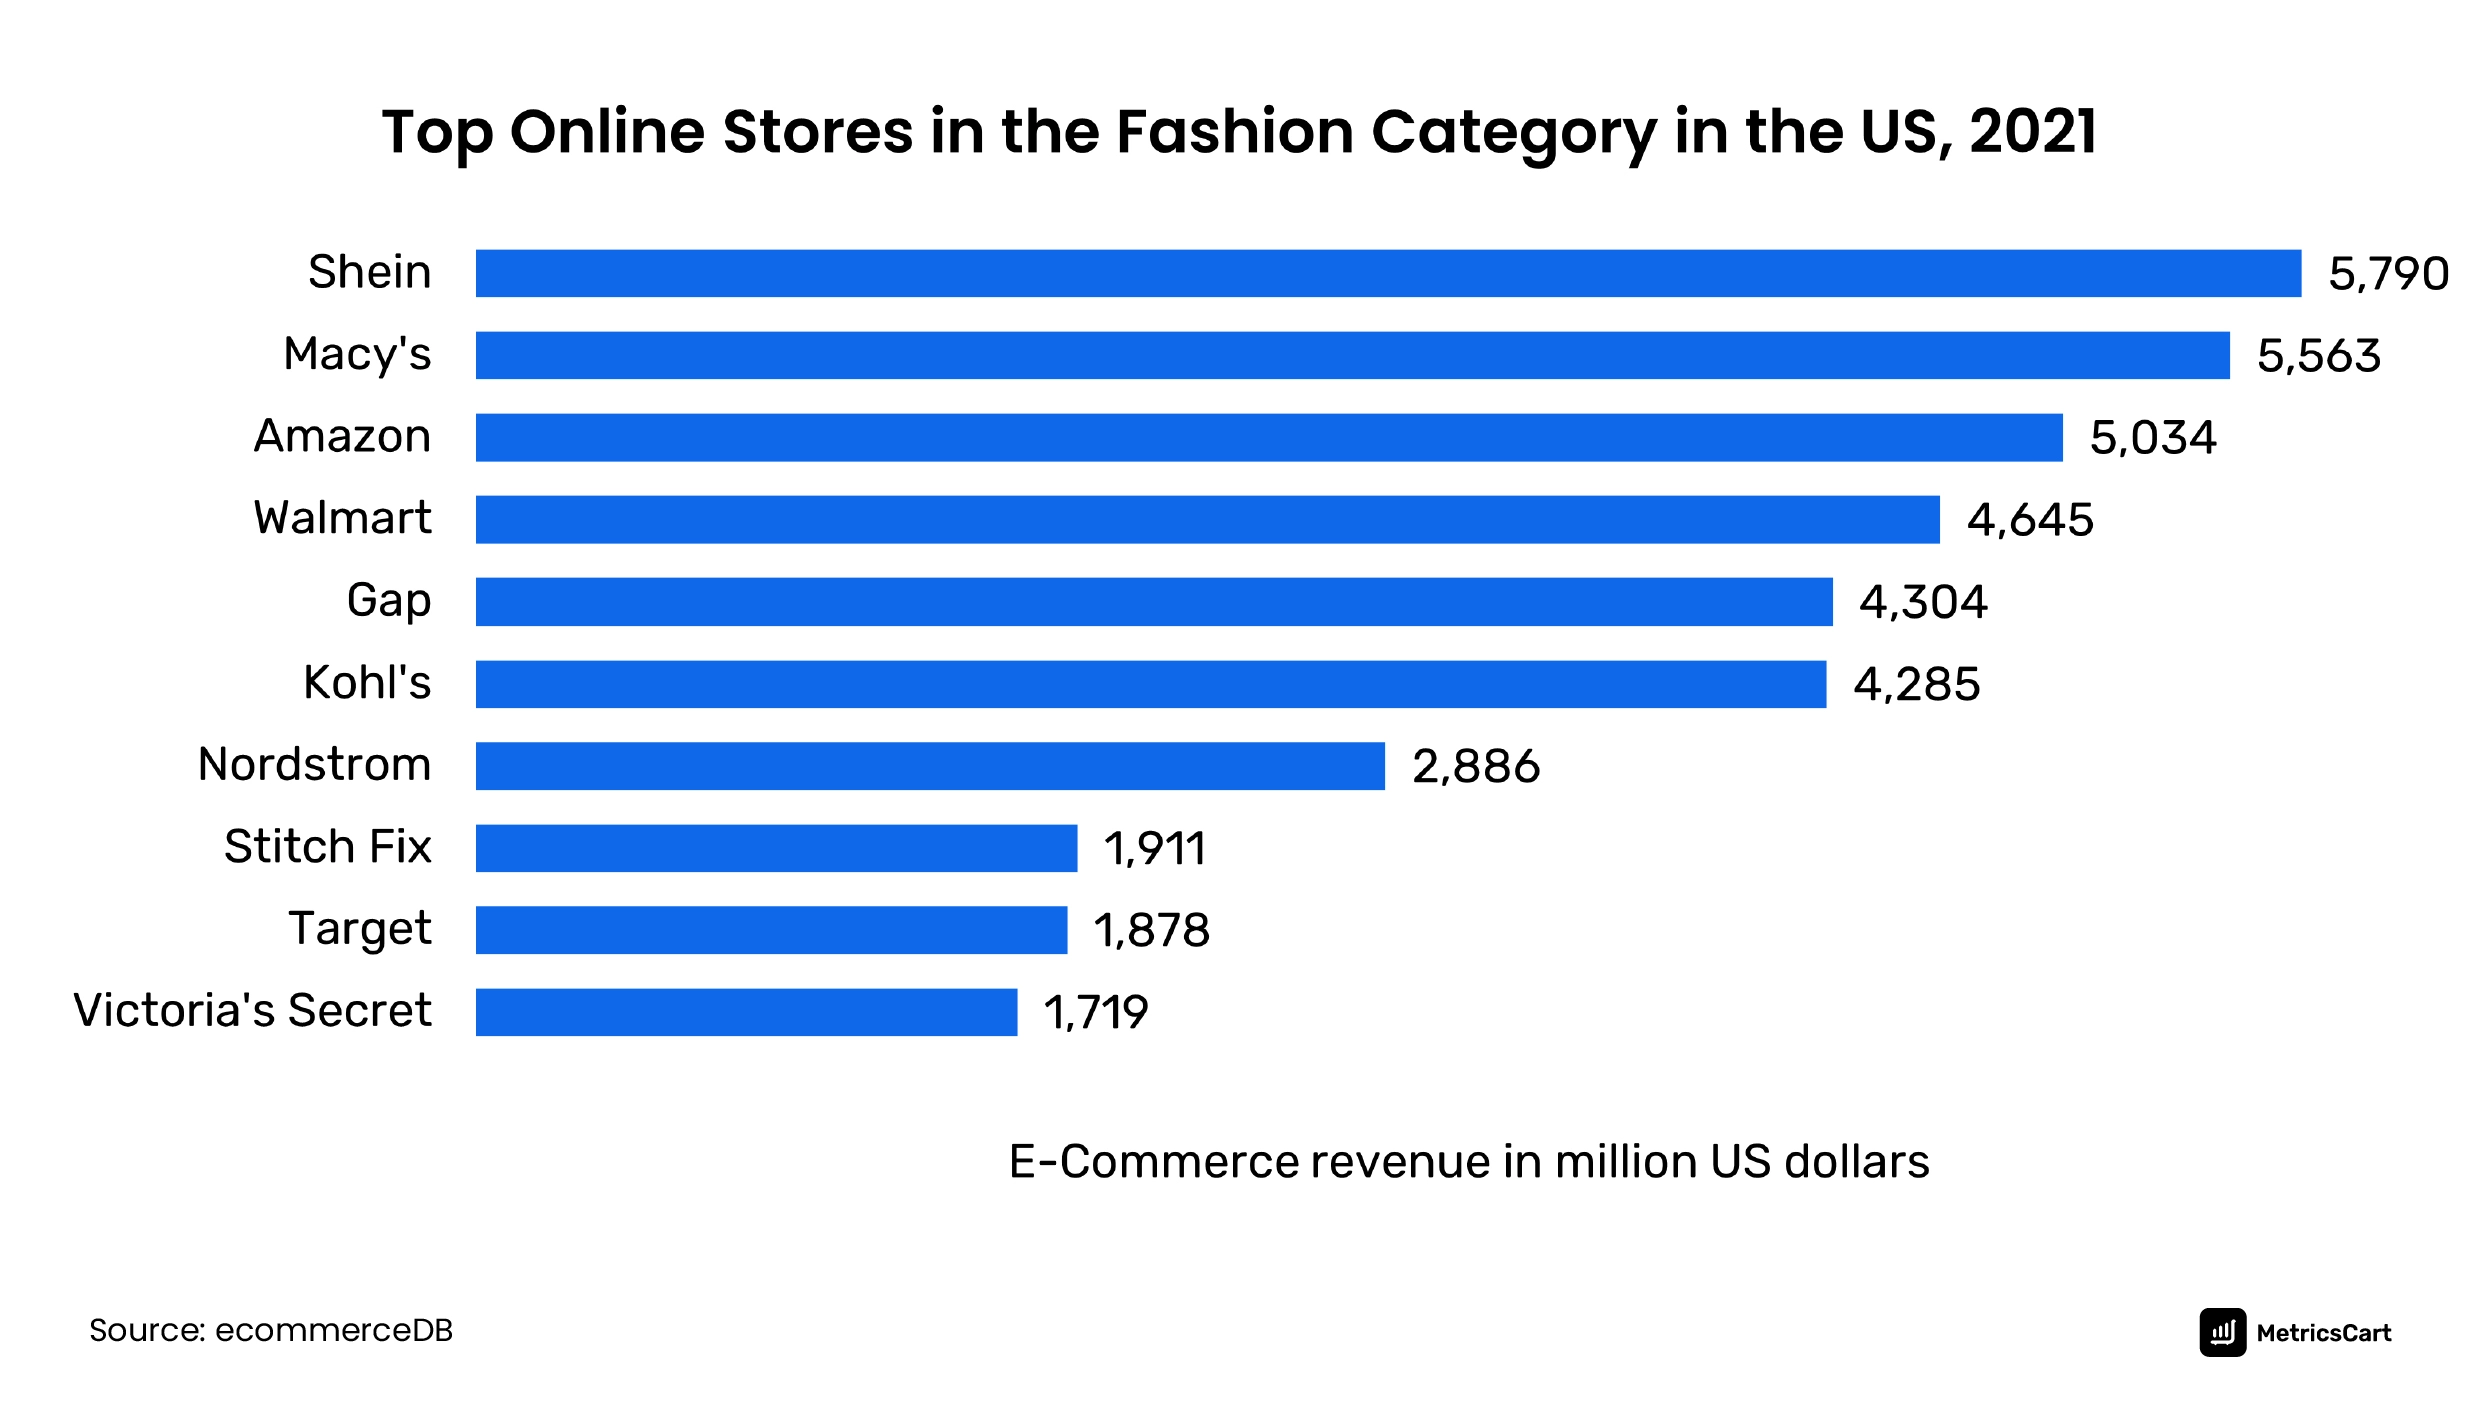 top online stores in the fashion ecommerce category in the US